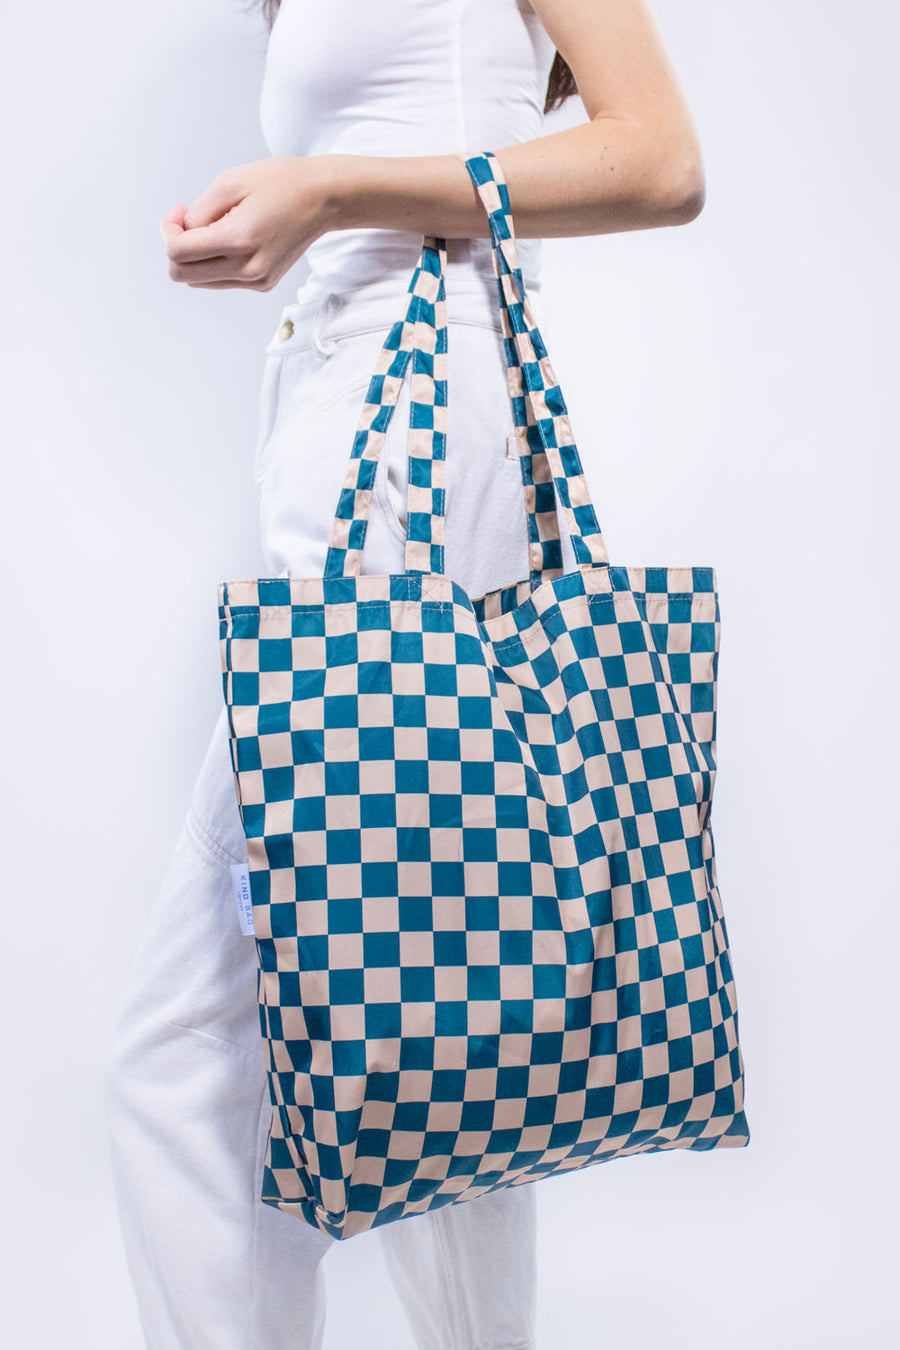 Checkerboard Teal & Beige | Recycled Tote